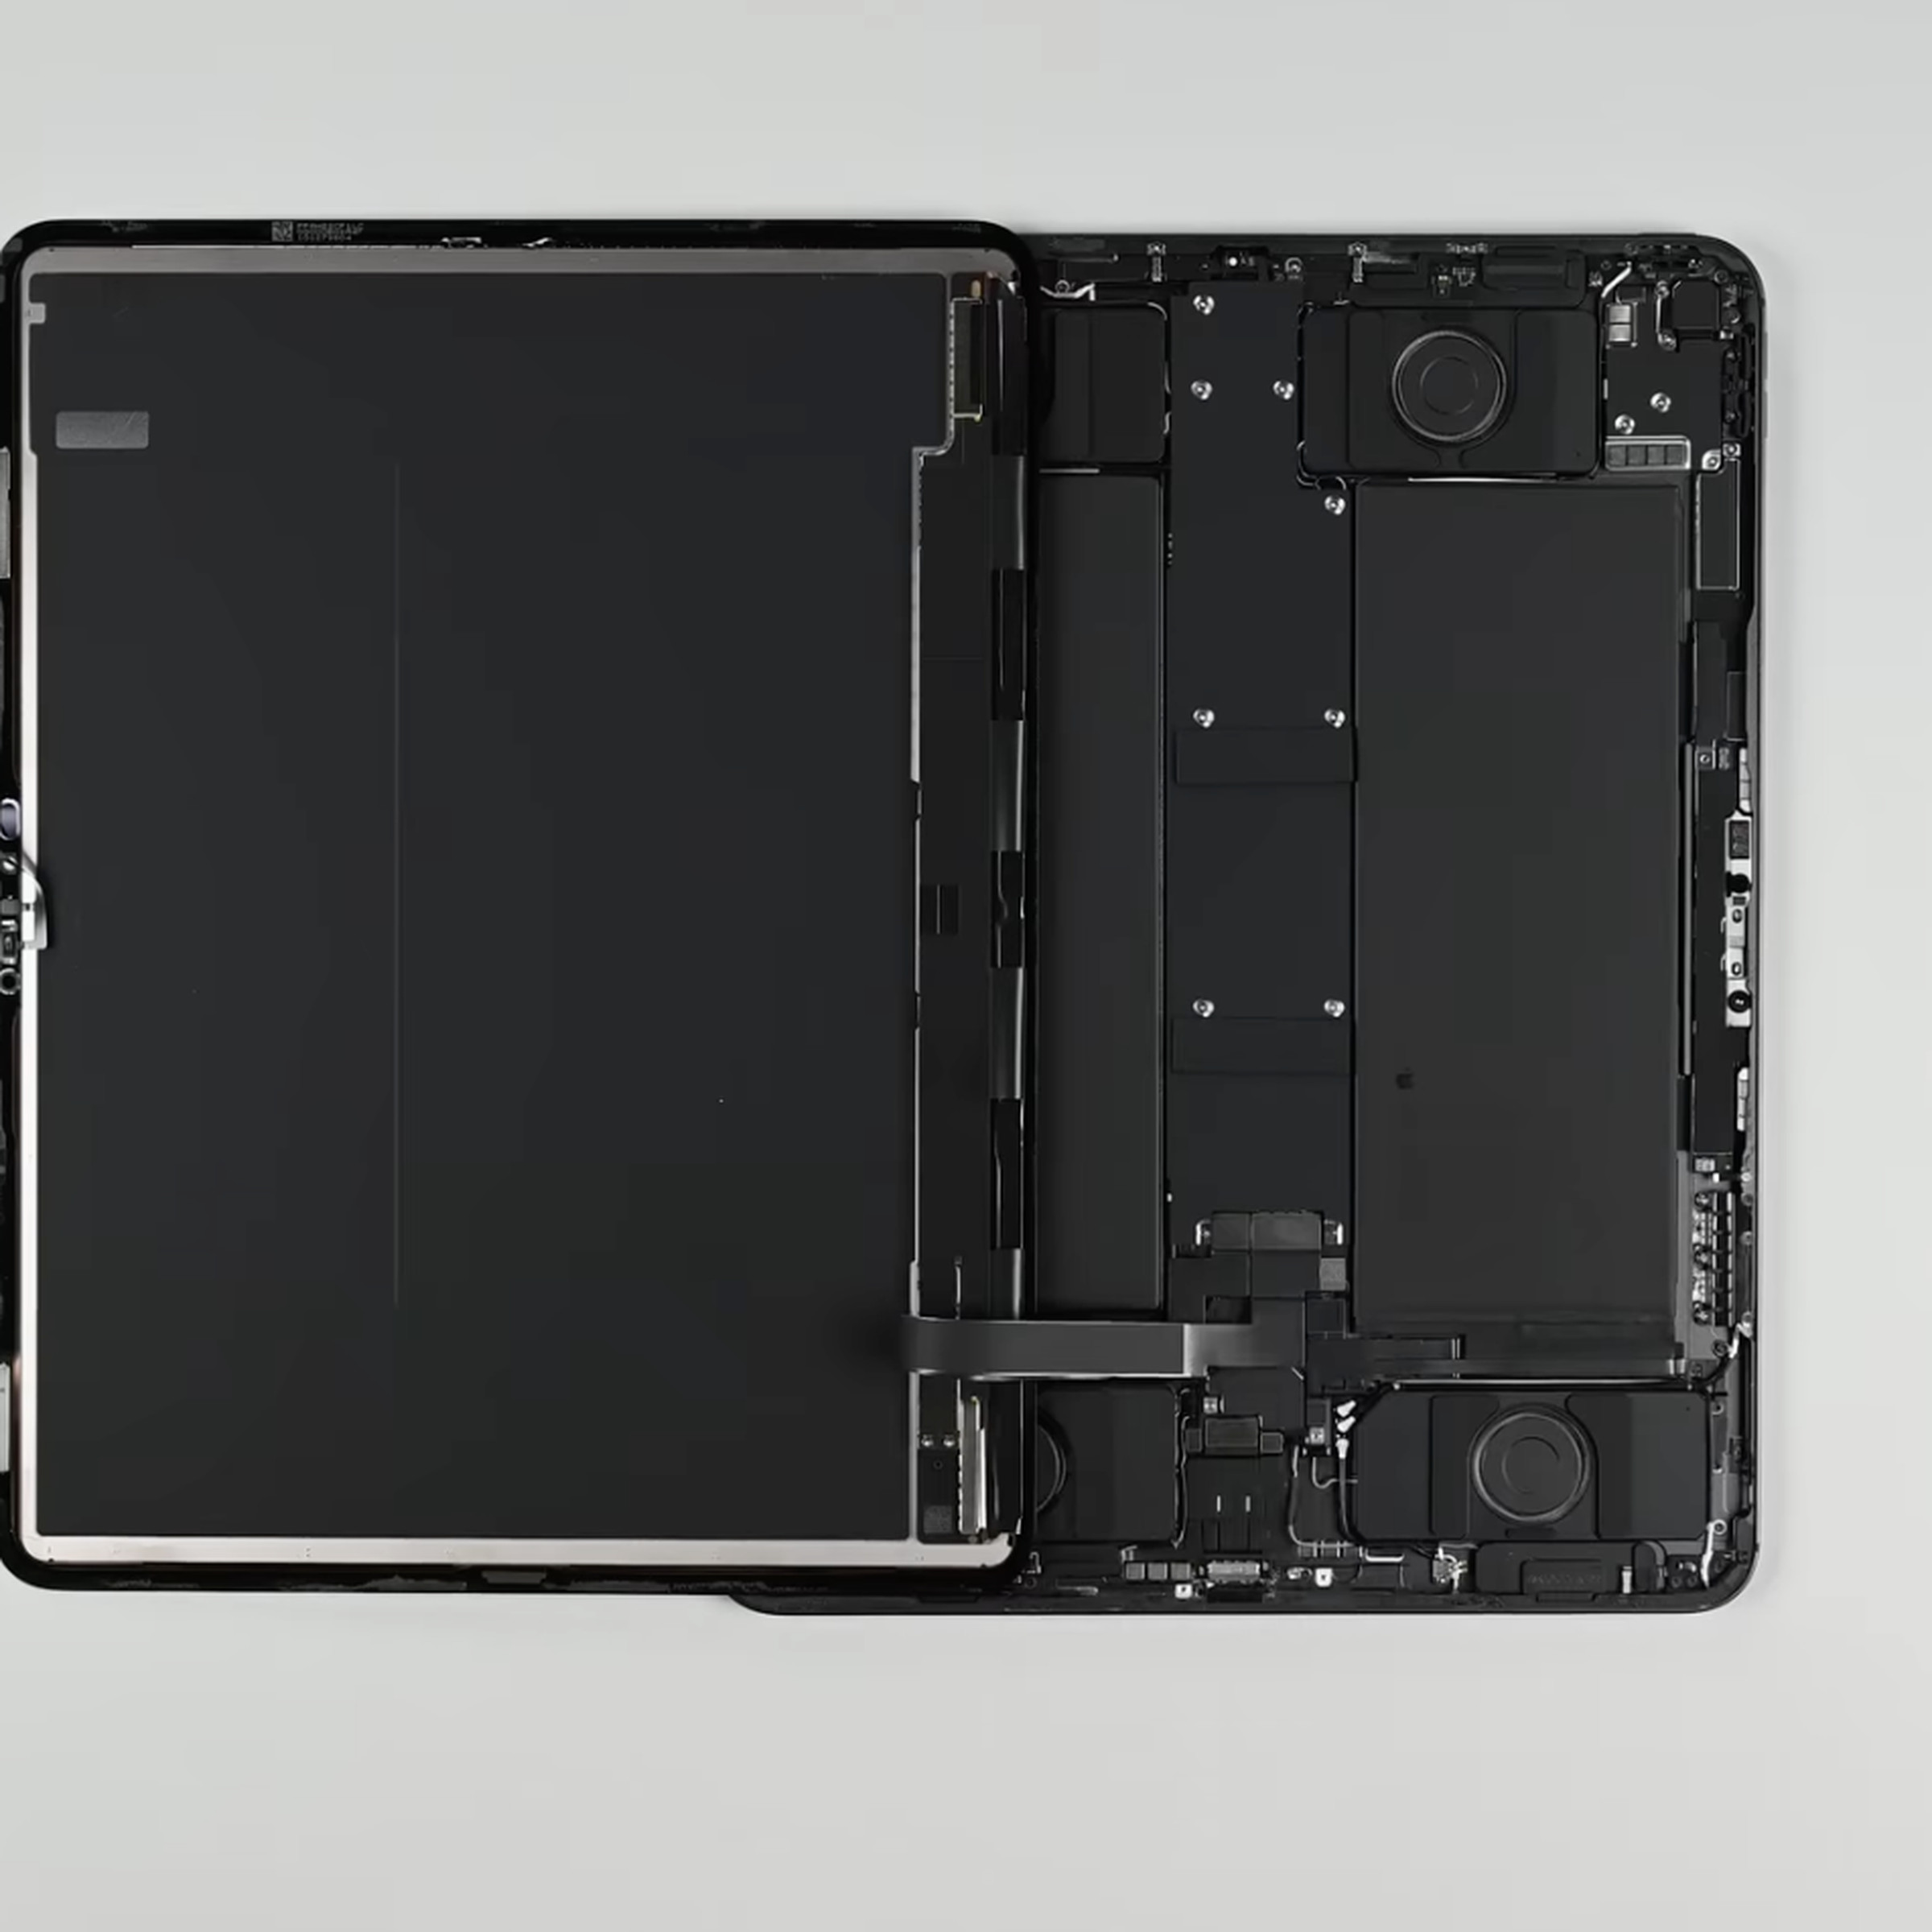 13-inch iPad Pro with screen removed and laying partially on top of it.